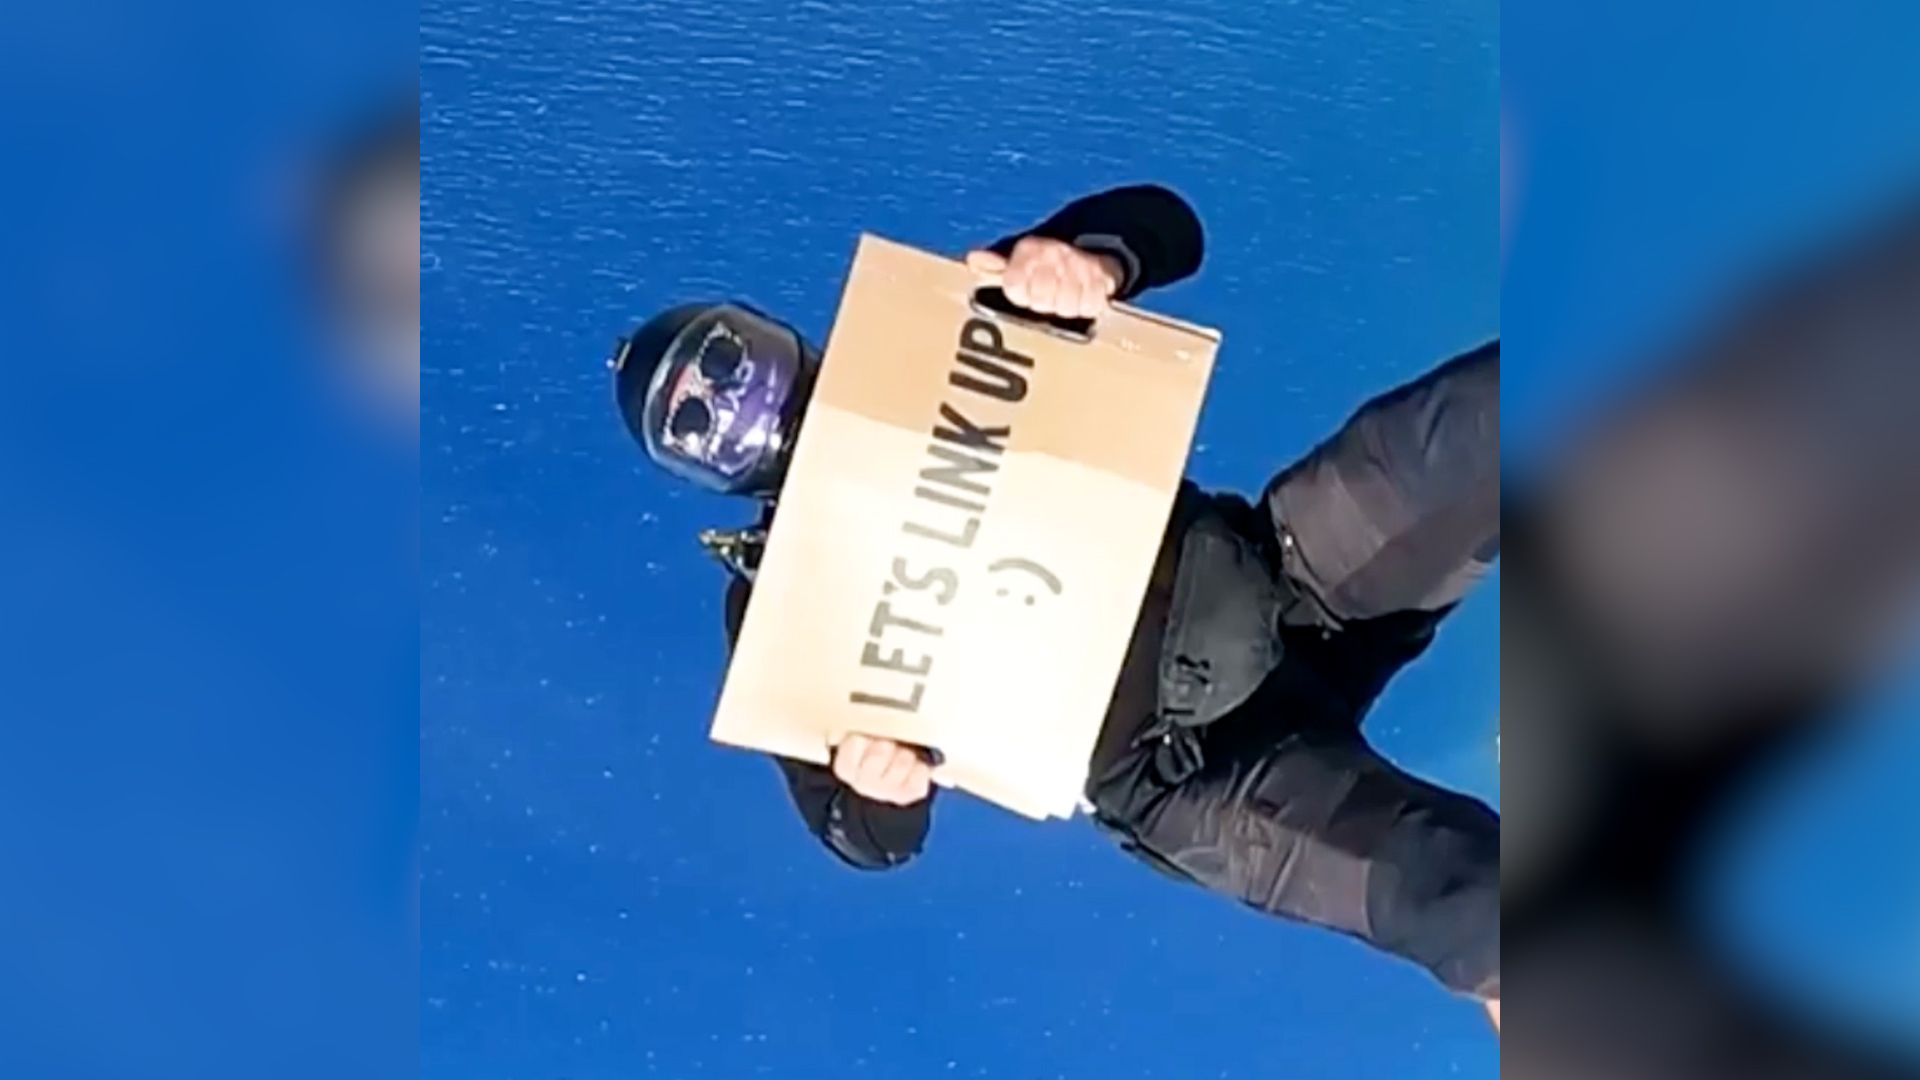 Job seeker lands dream role after jumping out of a plane with a cardboard sign asking for work